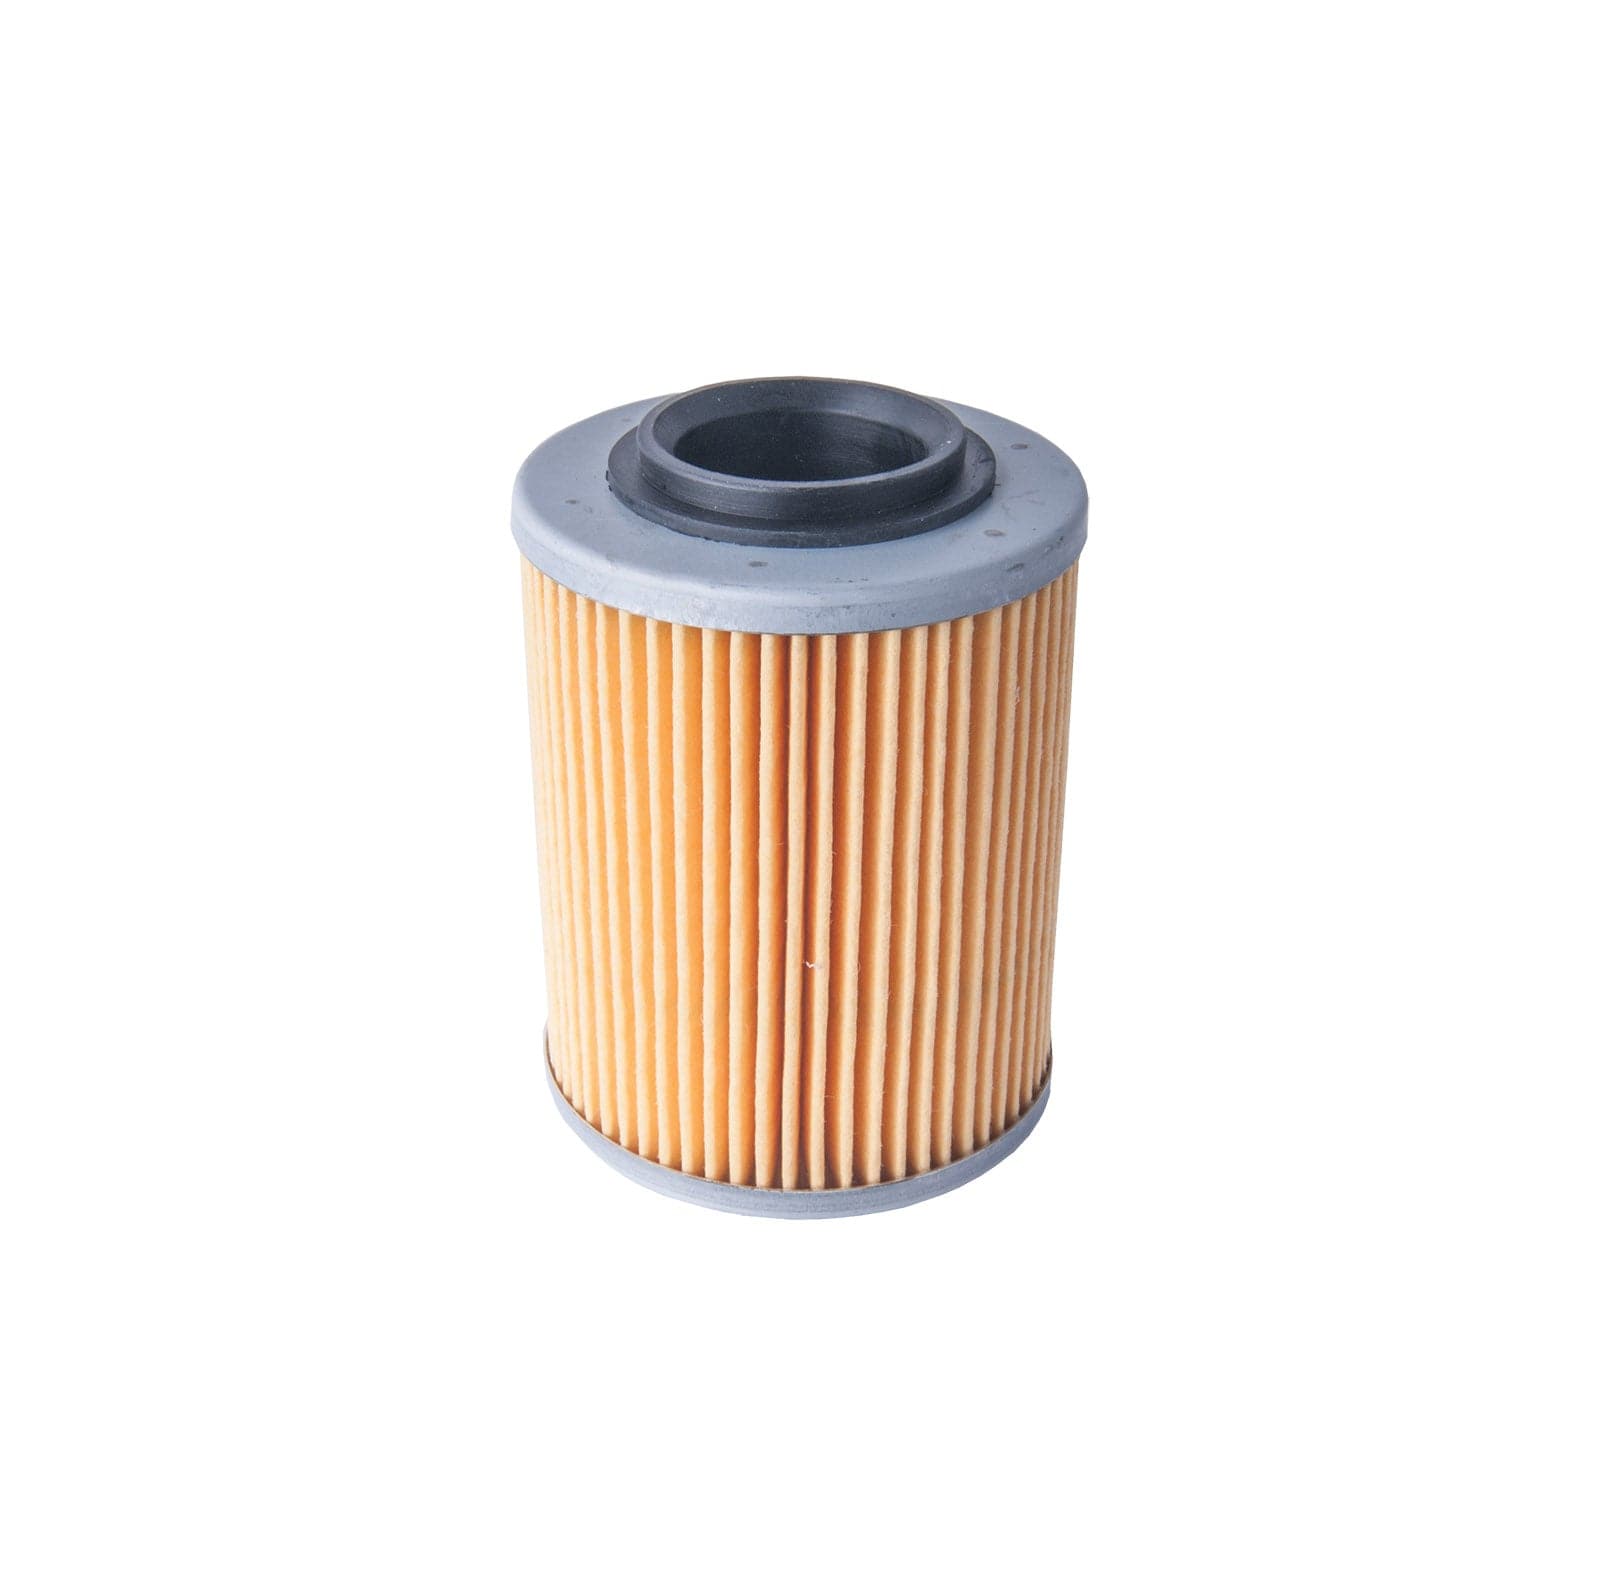 Oil Filter for Sea-Doo Spark 903